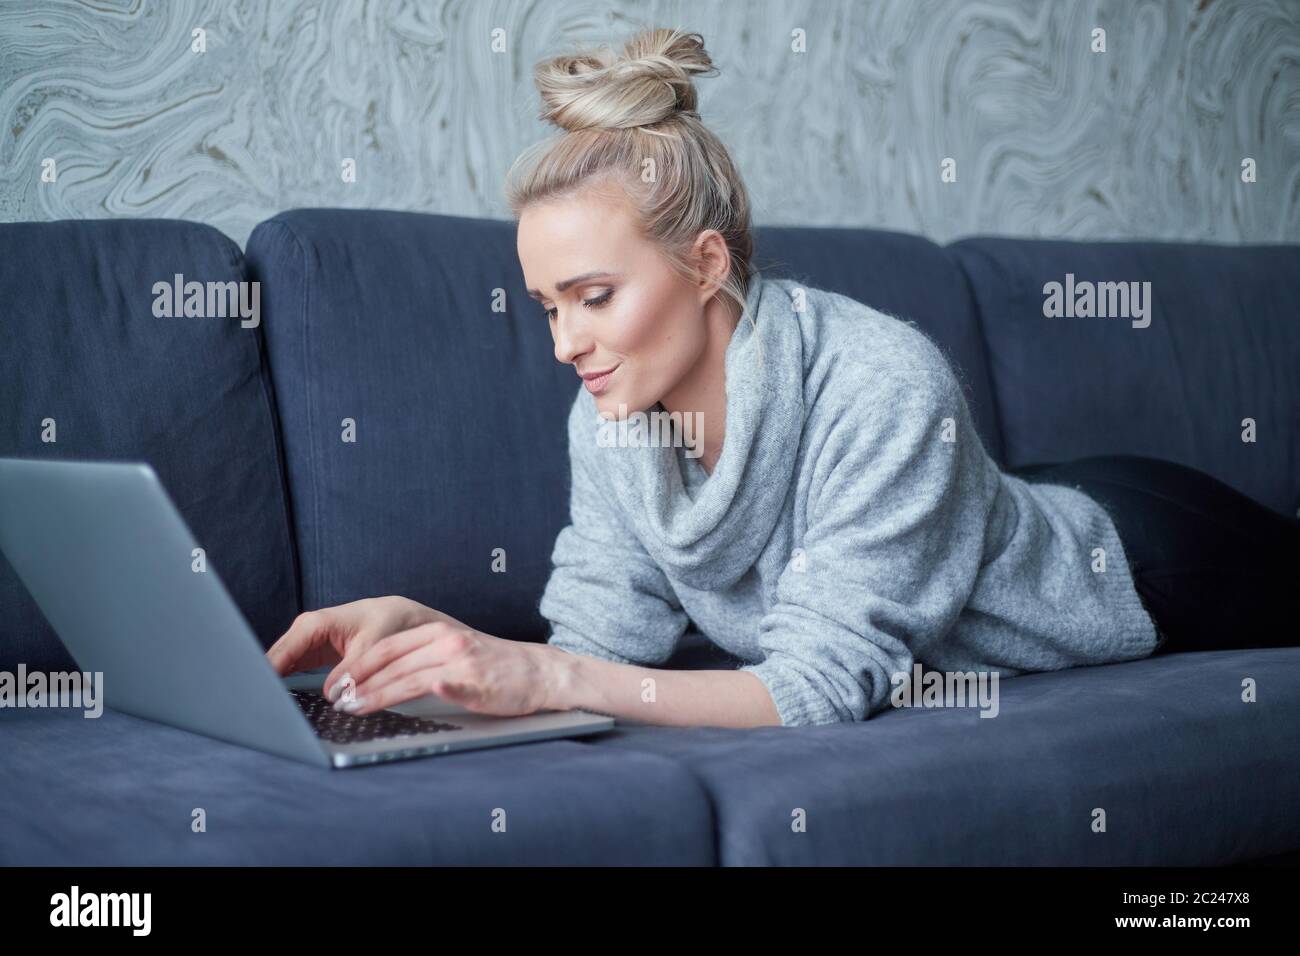 Happy blond woman lying prone on sofa and working on laptop computer Stock Photo